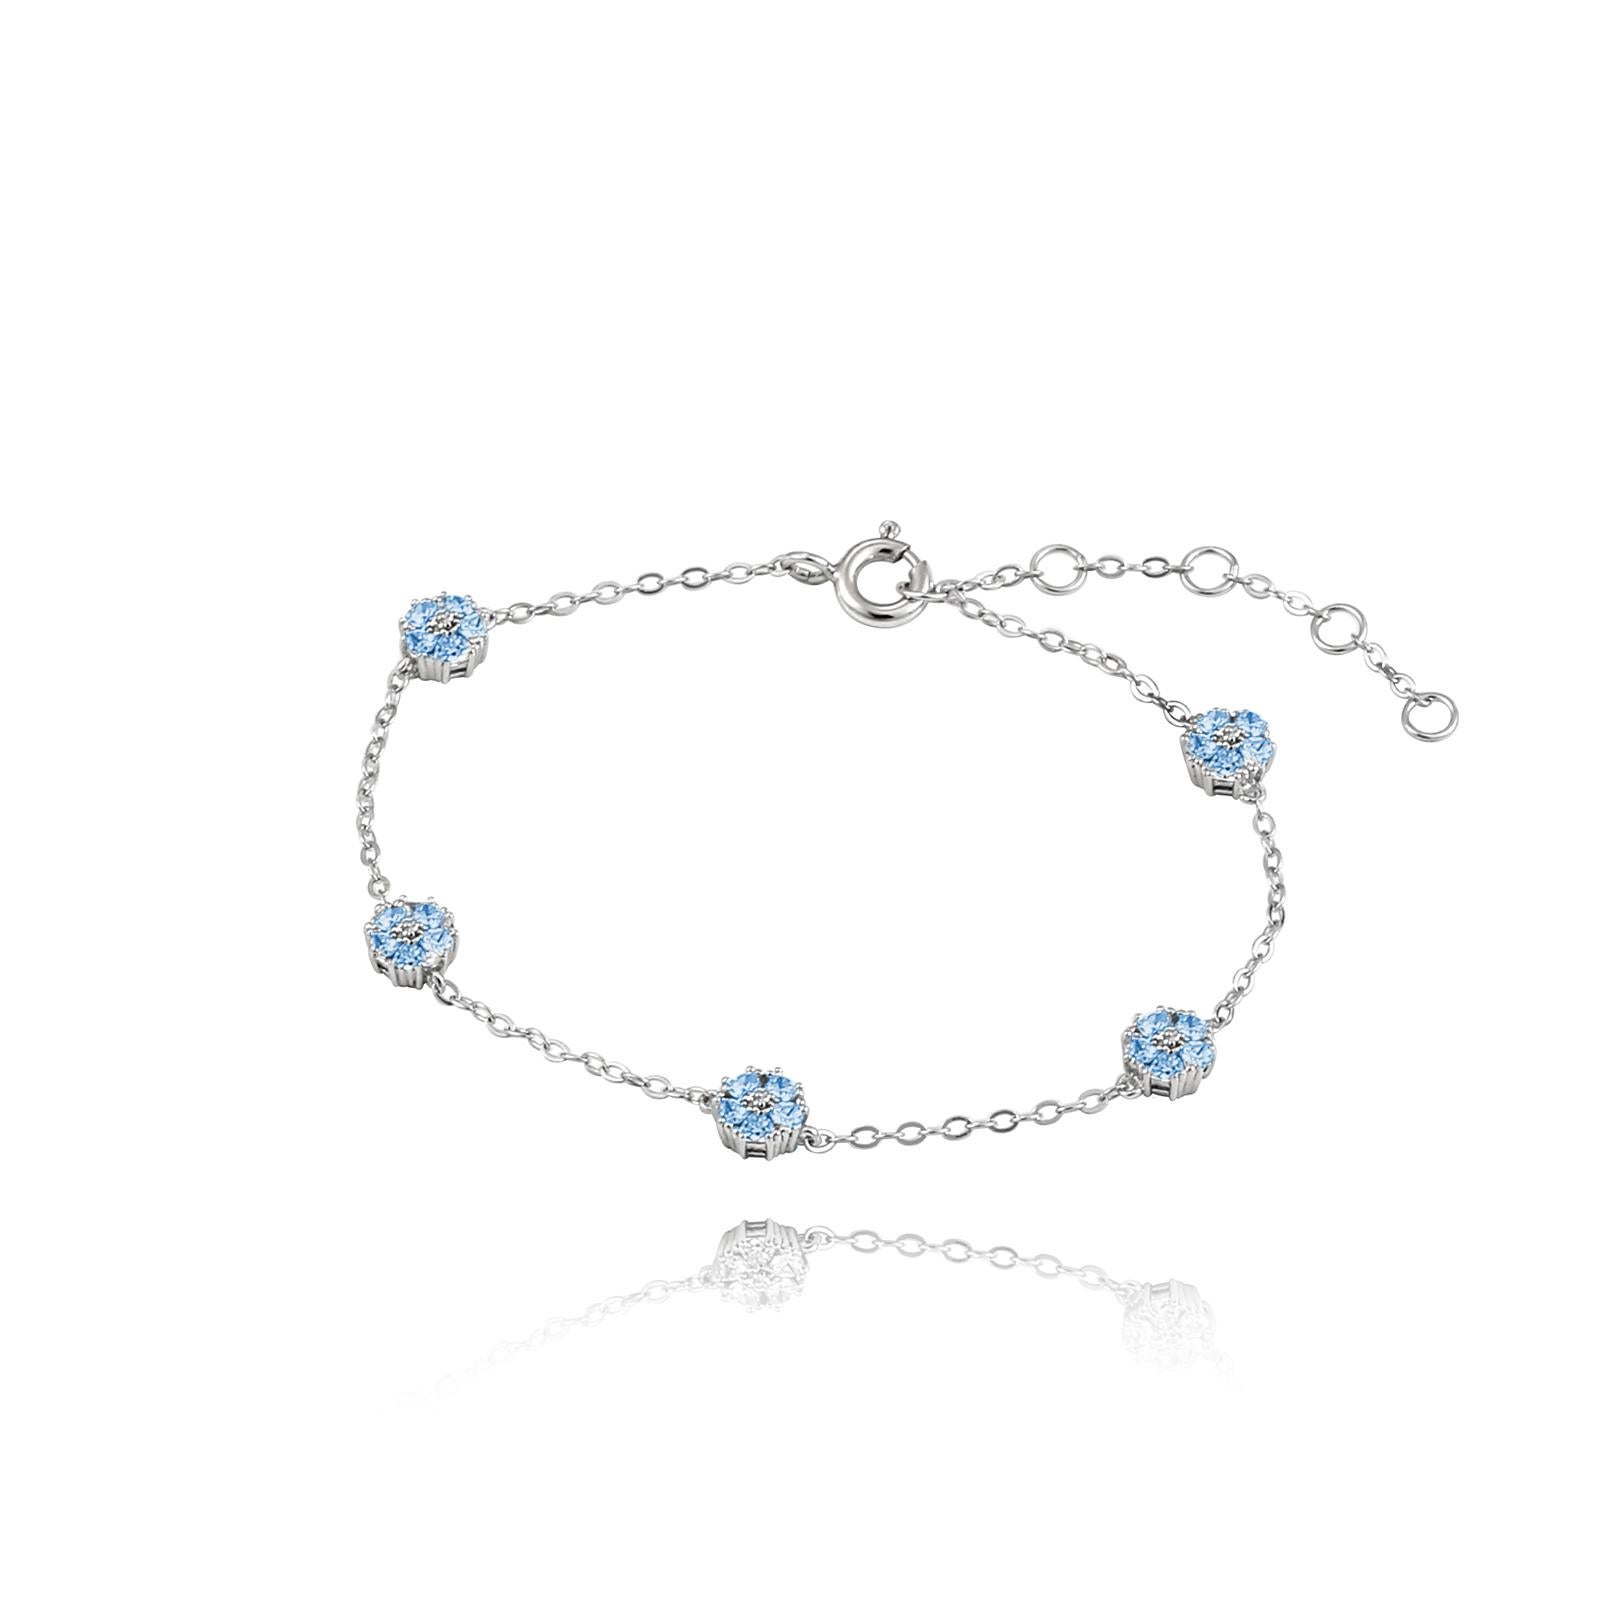 Whatever the season, take a little natural beauty with you everywhere you go. This delicate blossom chain bracelet is the perfect complement to any style, day or night. An adjustable .925 sterling silver chain bracelet to fit all wrist sizes with 3D